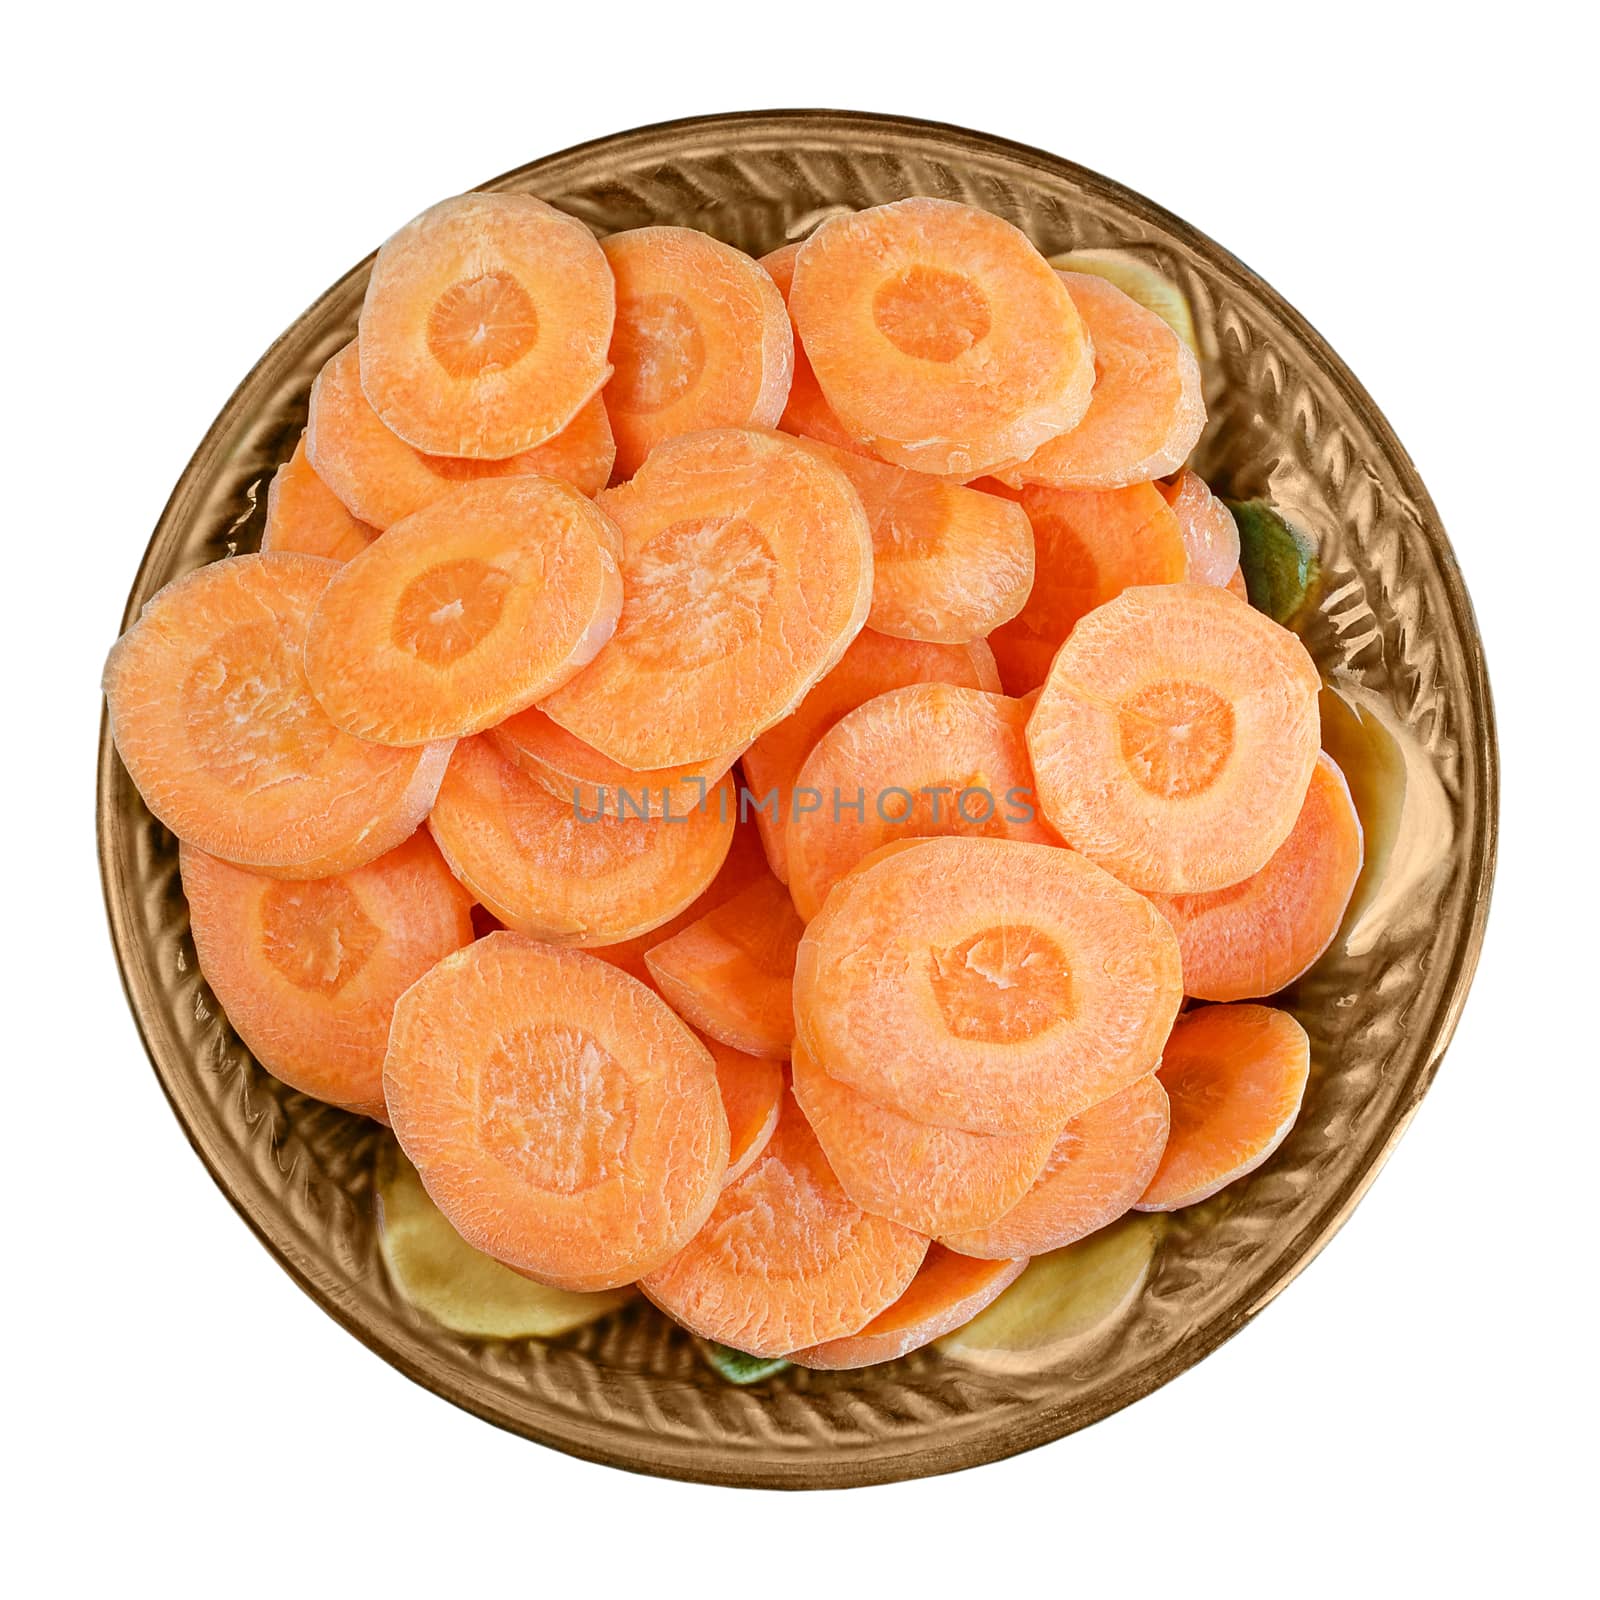 Sliced carrots in a bowl, isolated on white background